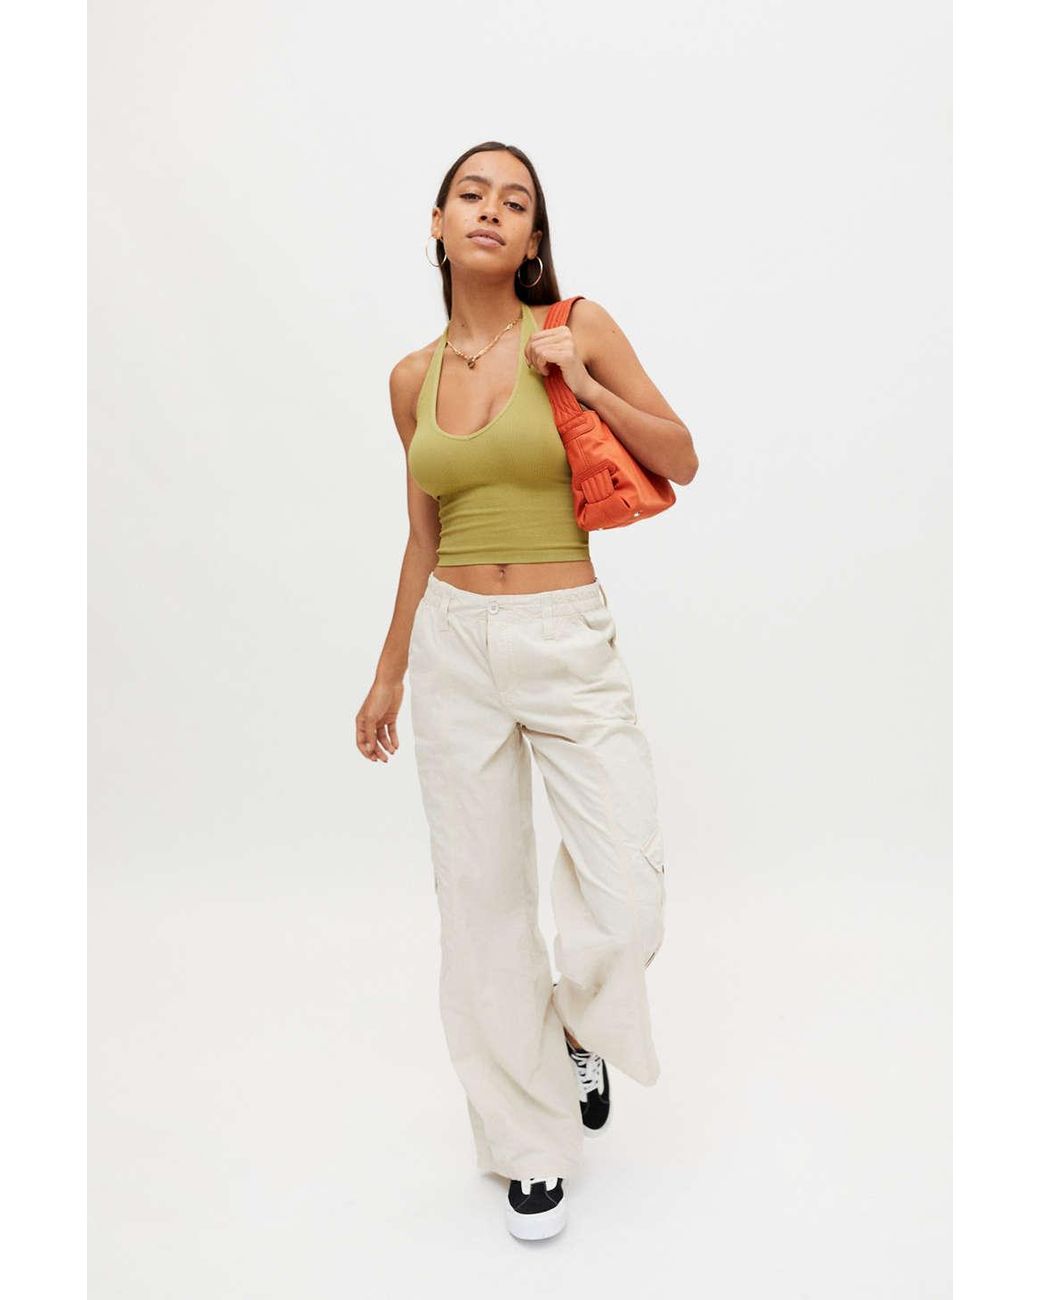 Out From Under Jackie Seamless Zip-Up Halter Bra Top  Urban Outfitters  Japan - Clothing, Music, Home & Accessories